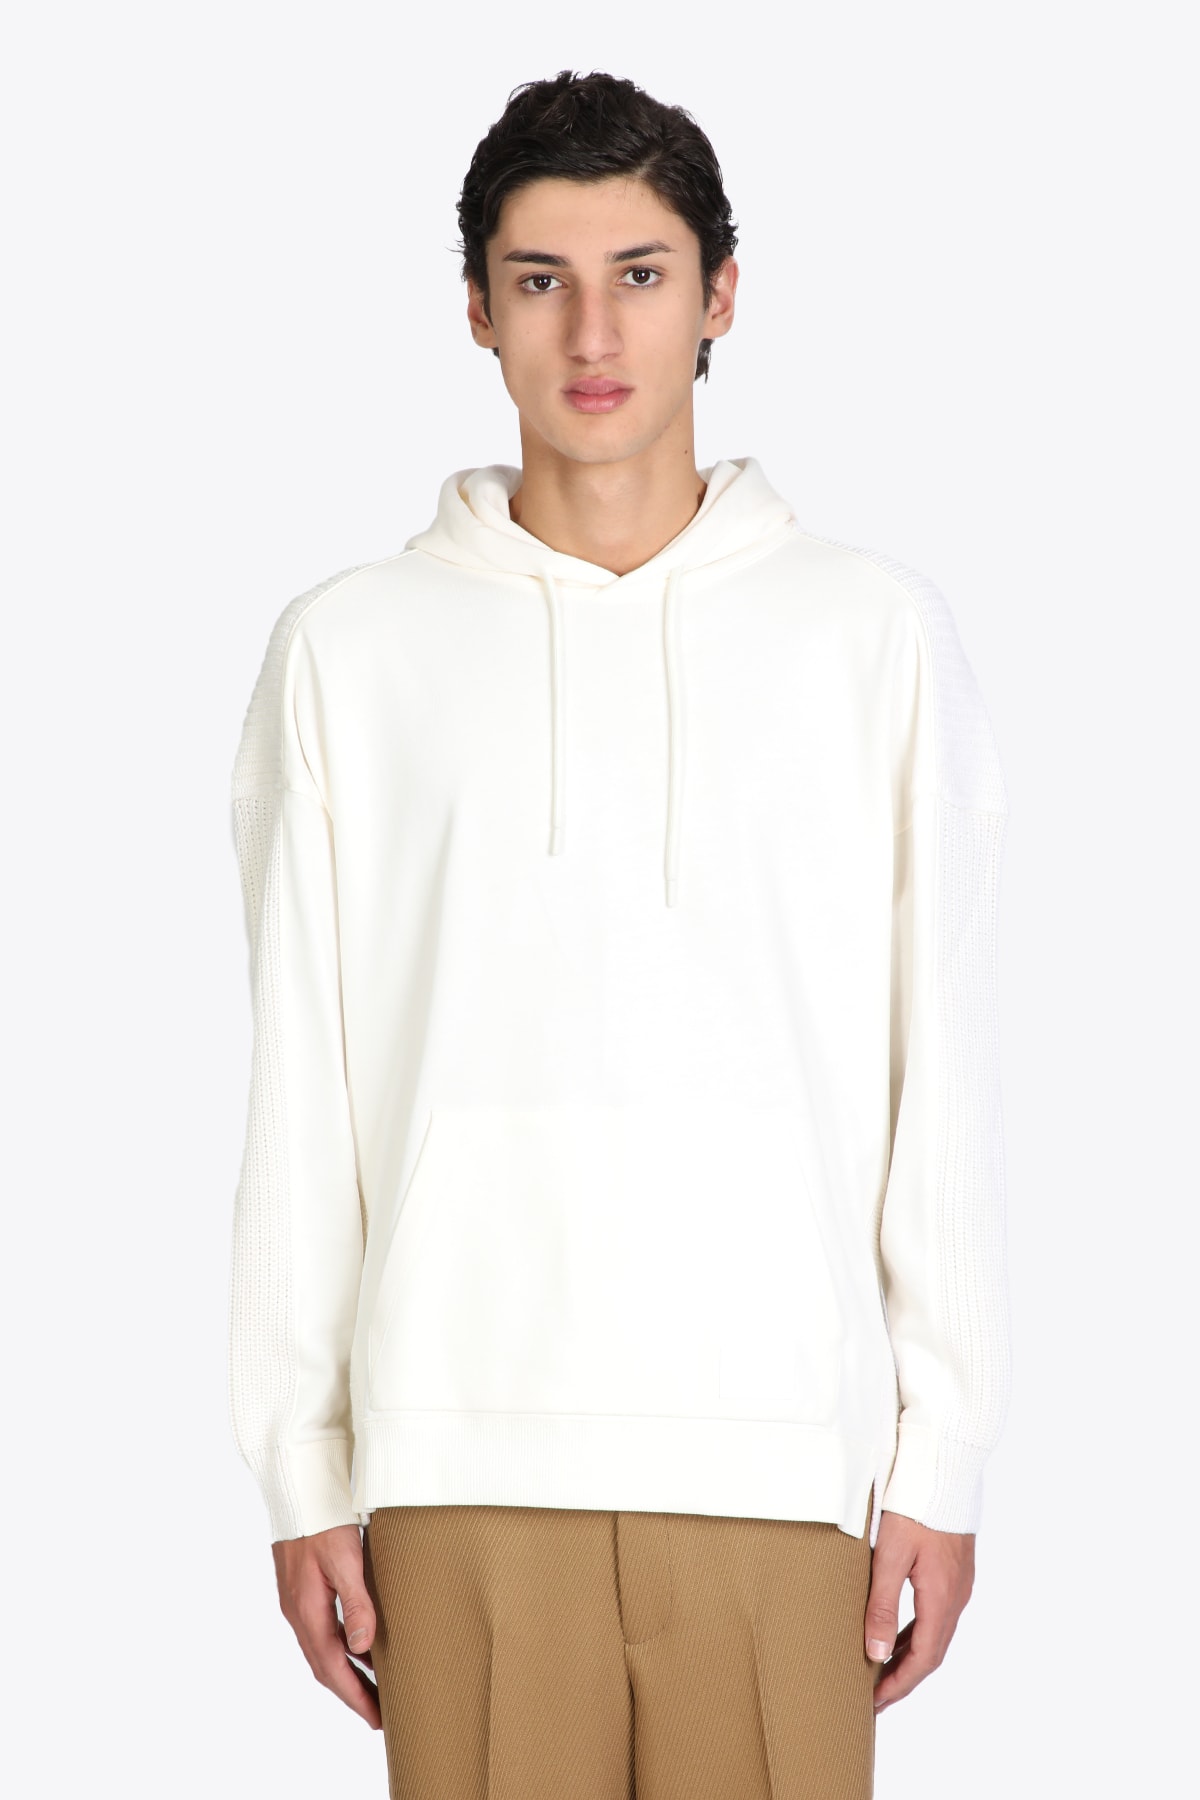 Emporio Armani Sweatshirt Off-white cotton hoodie with knitted rear.